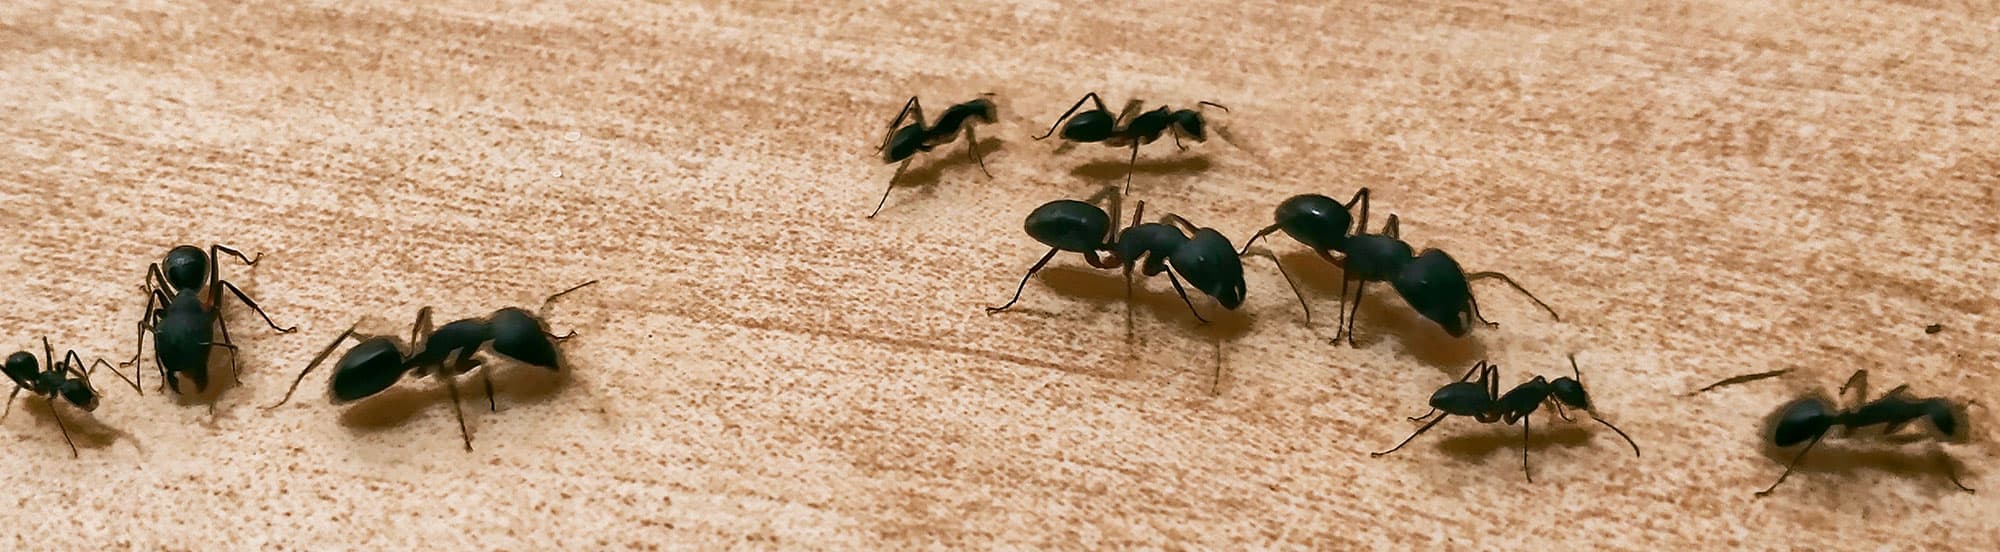 carpenter ants searching for food